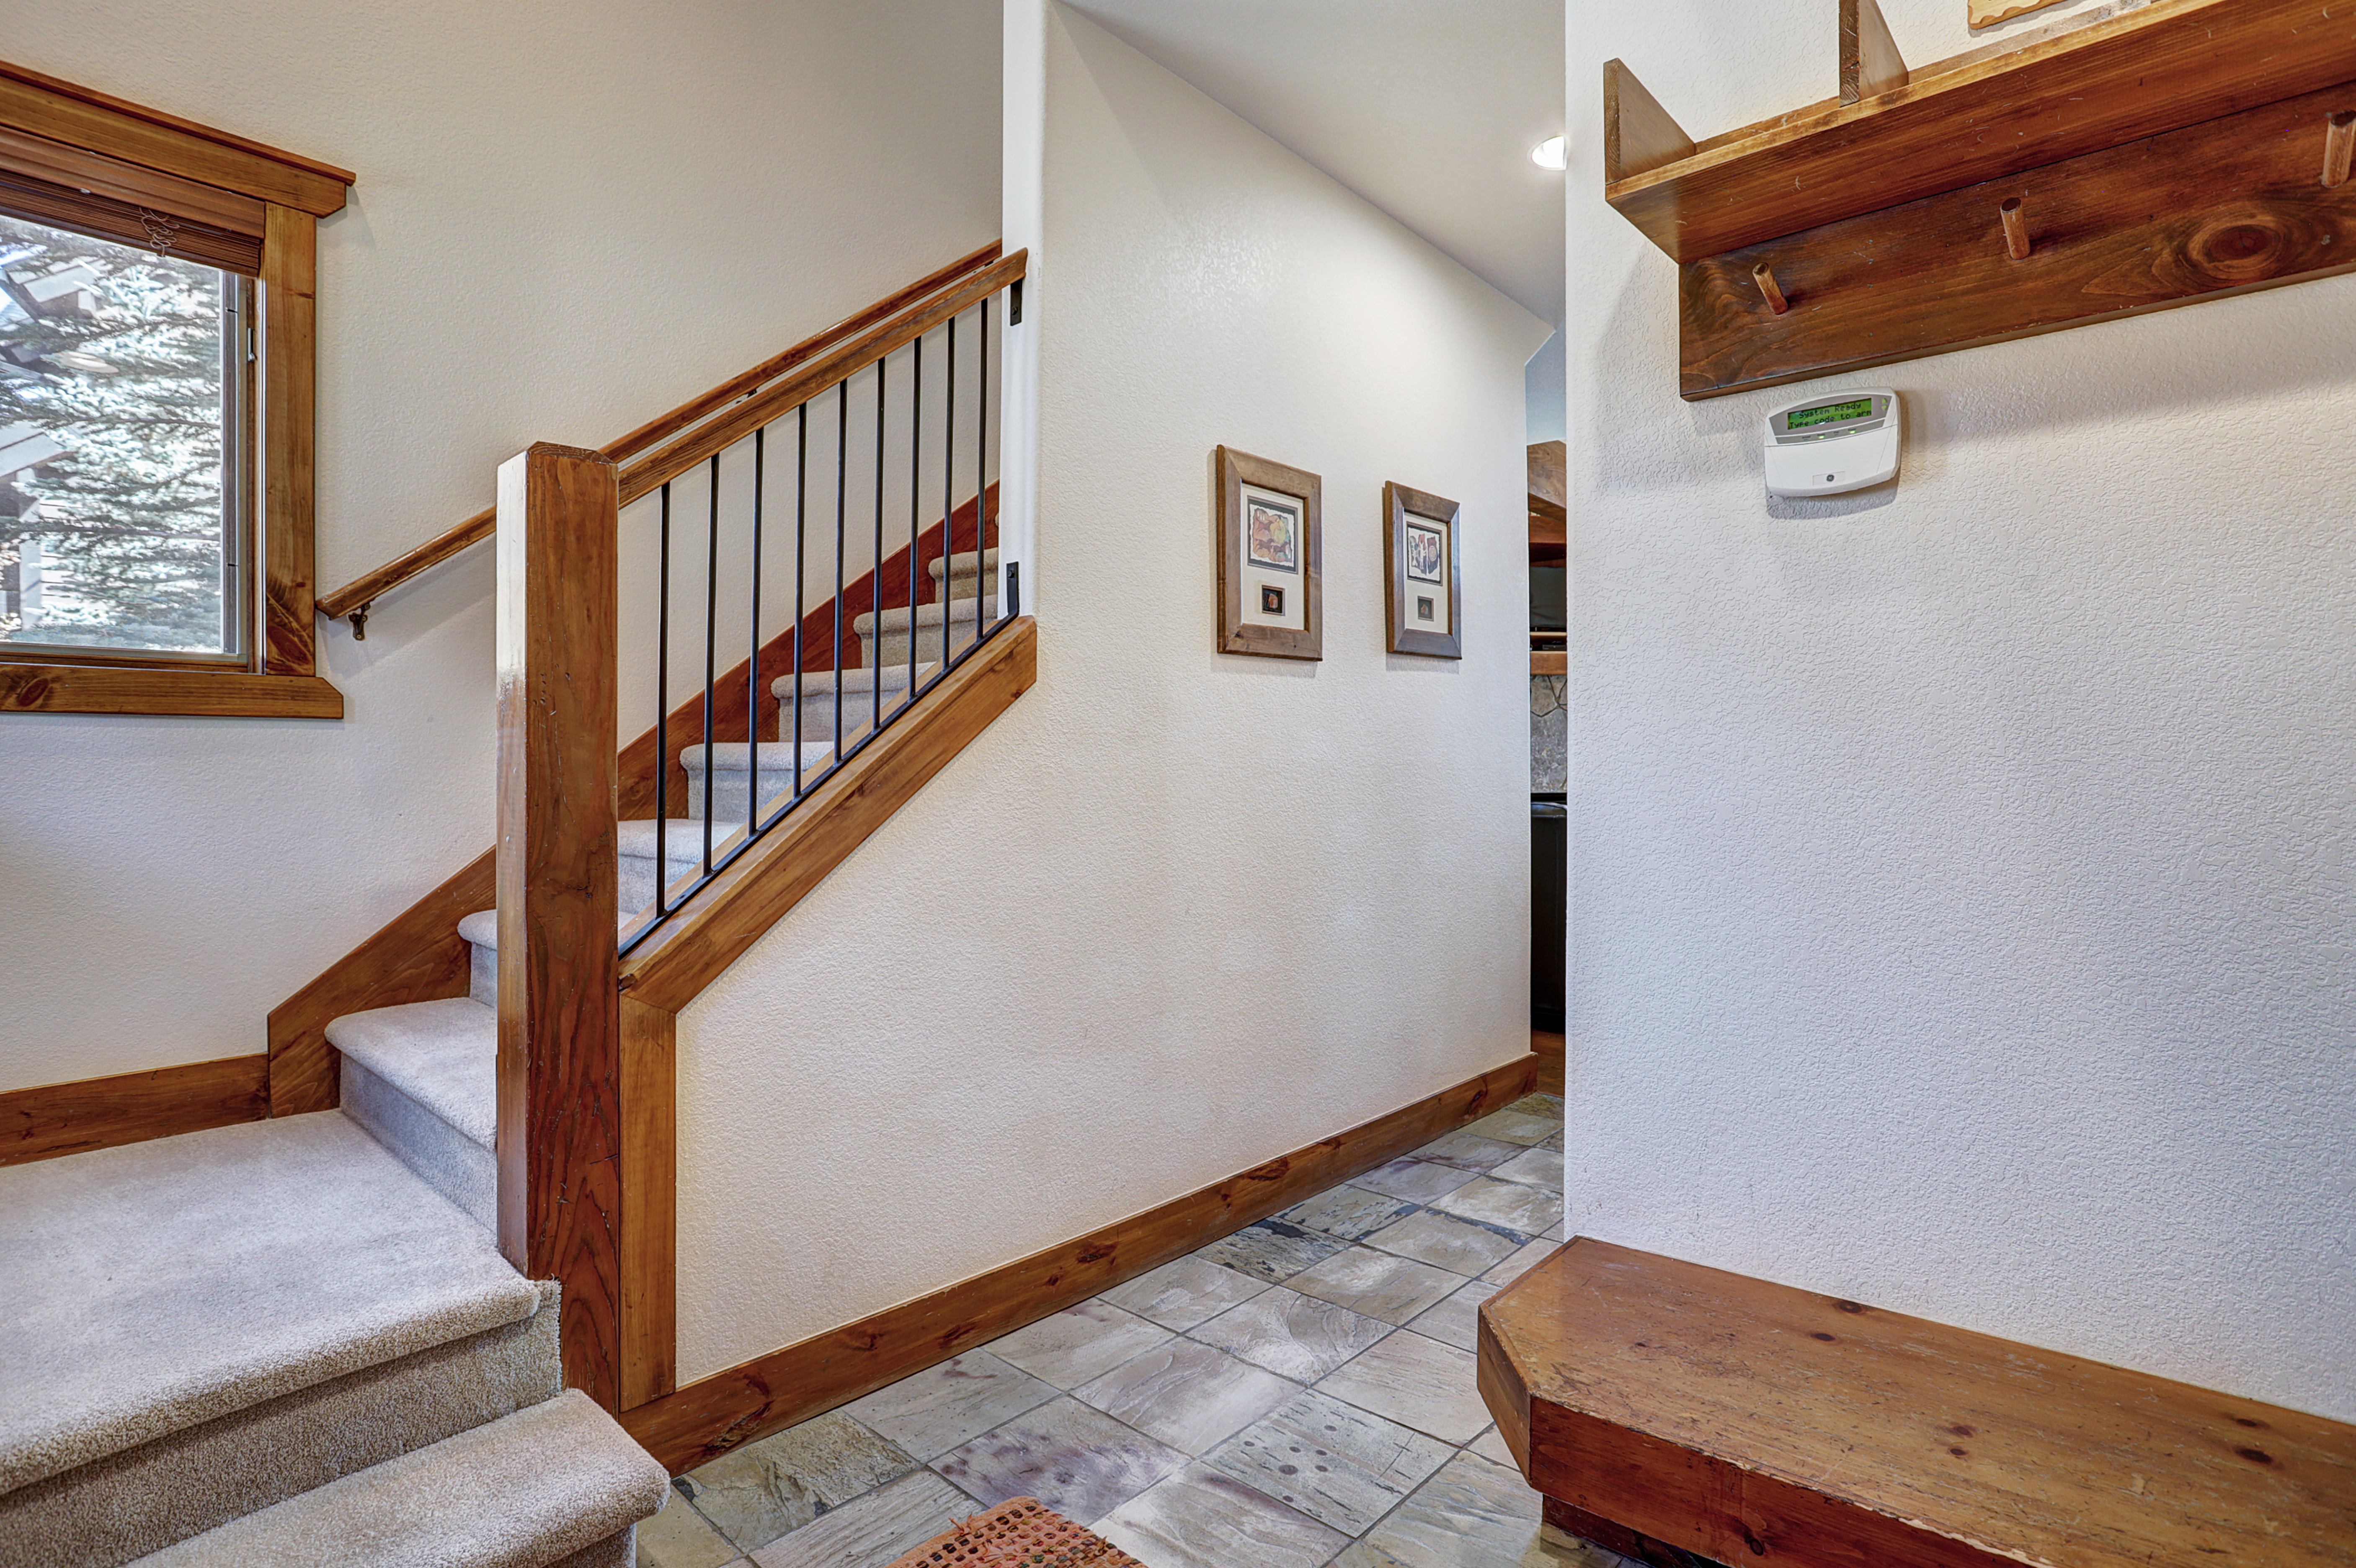 Store your shoes and winter gear in the entryway coat closet and bench storage - Amber Sky Breckenridge Vacation Rental